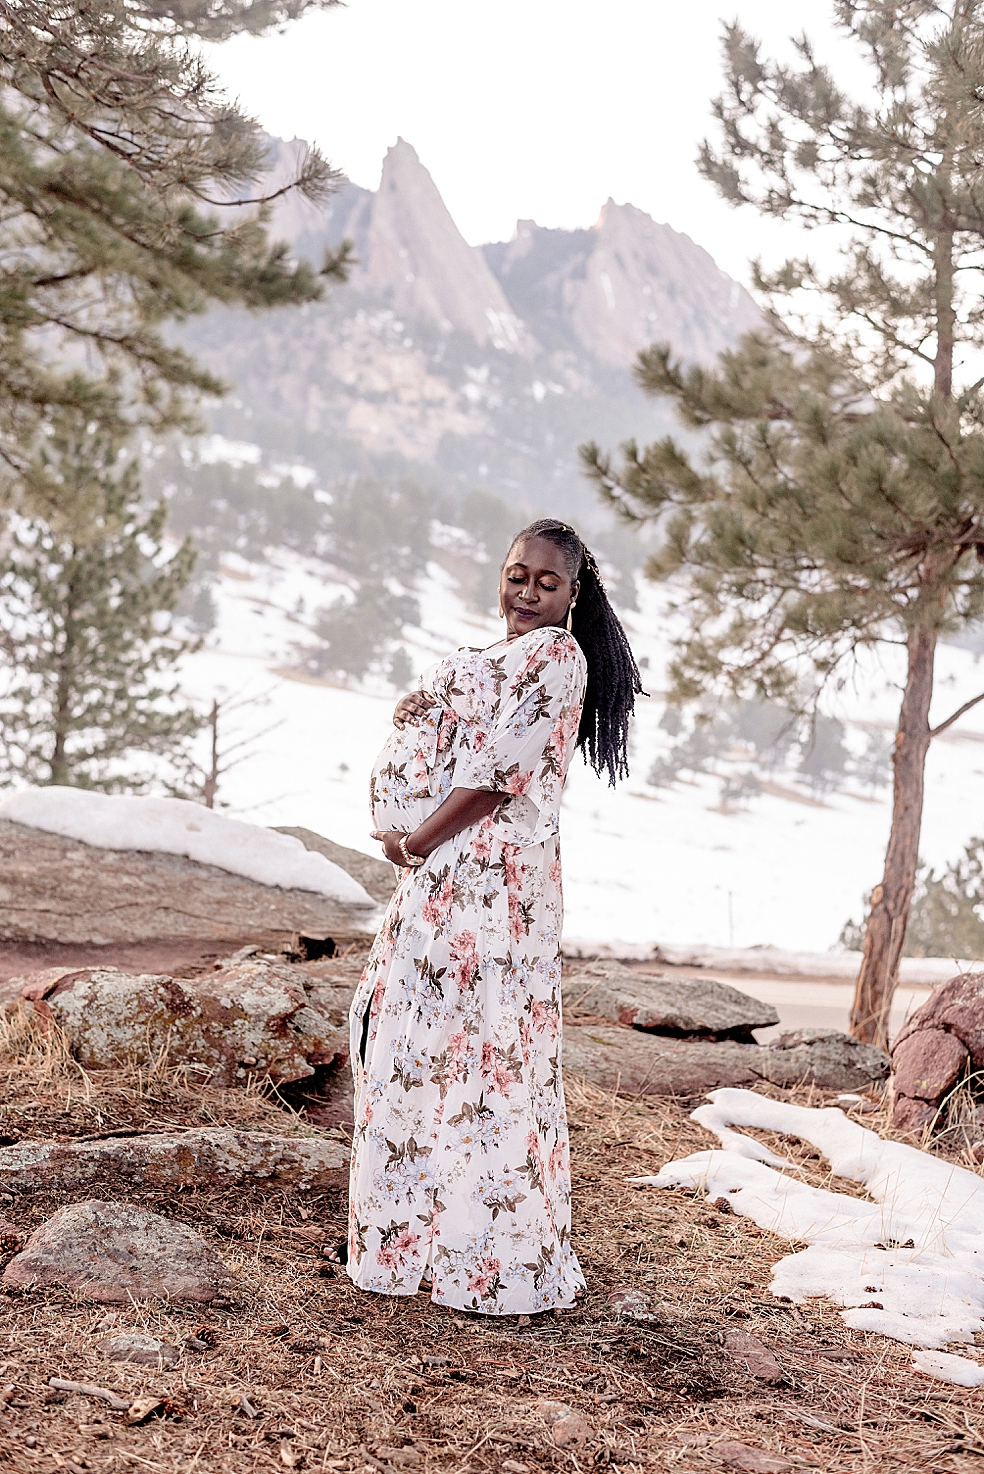 Mom to be in floral dress holding her belly | Photo by Jessica Lee Photography